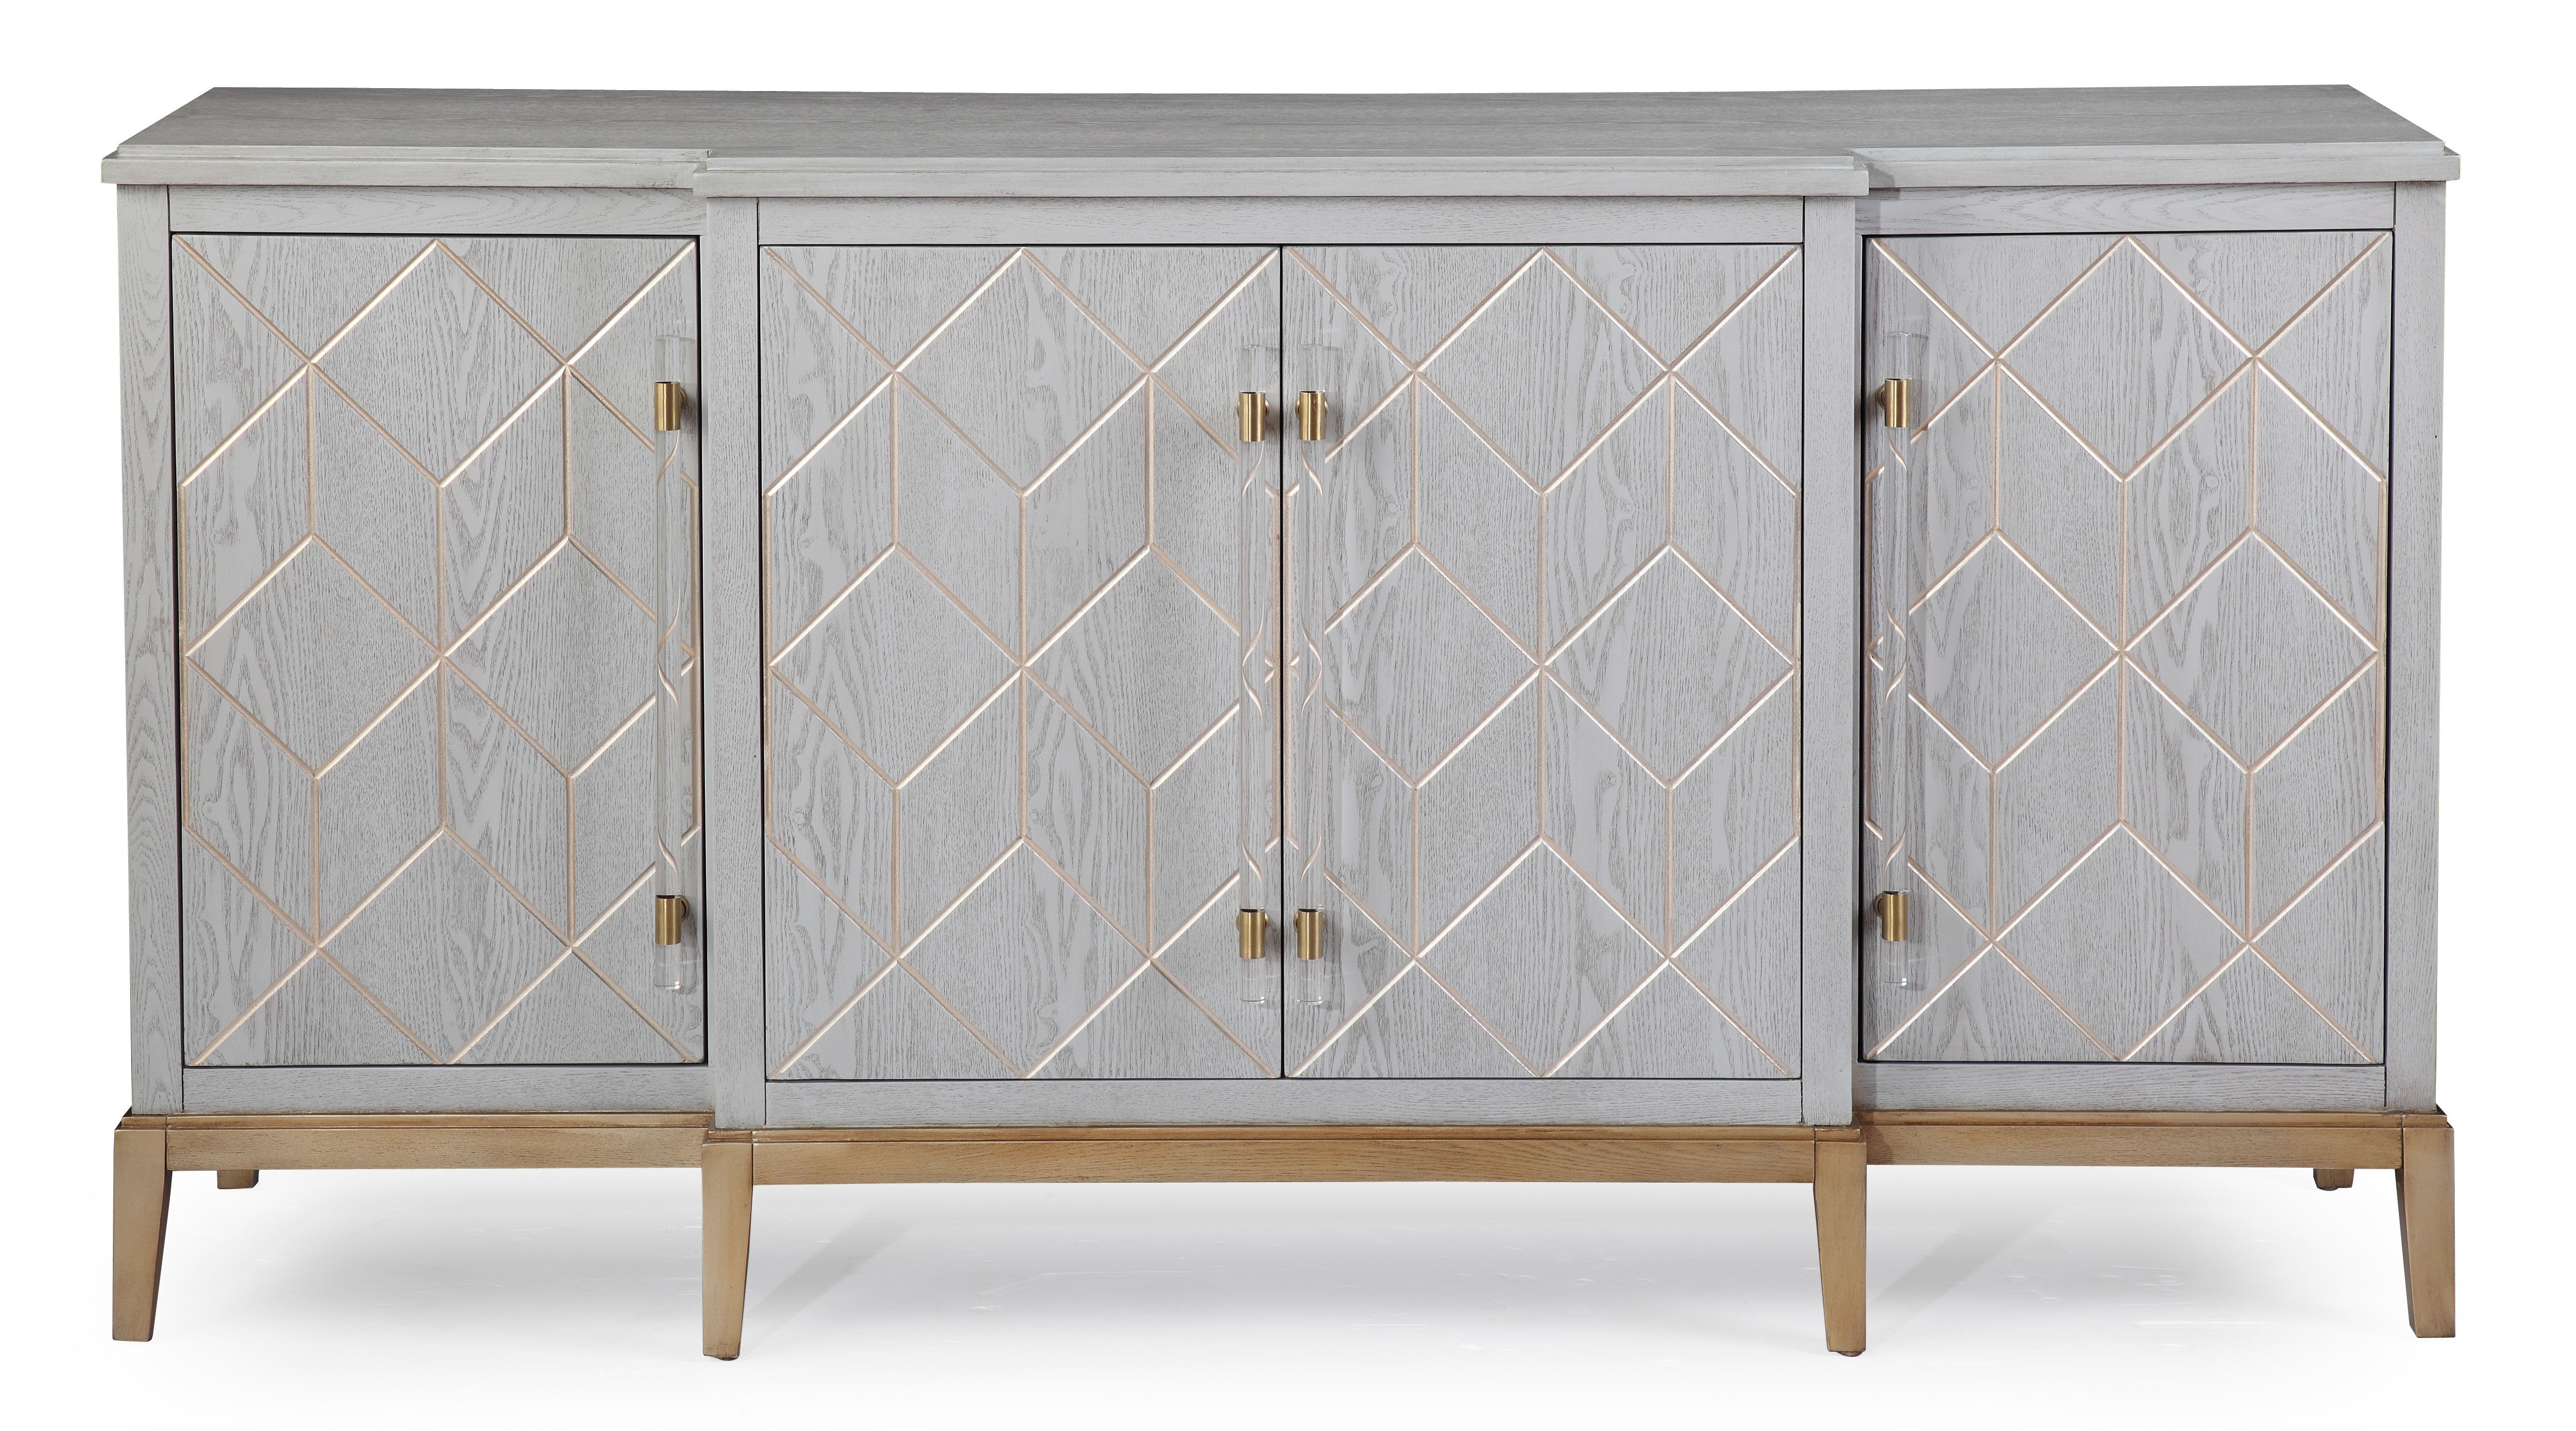 Rosson Sideboard Within 2018 Casolino Sideboards (View 3 of 20)